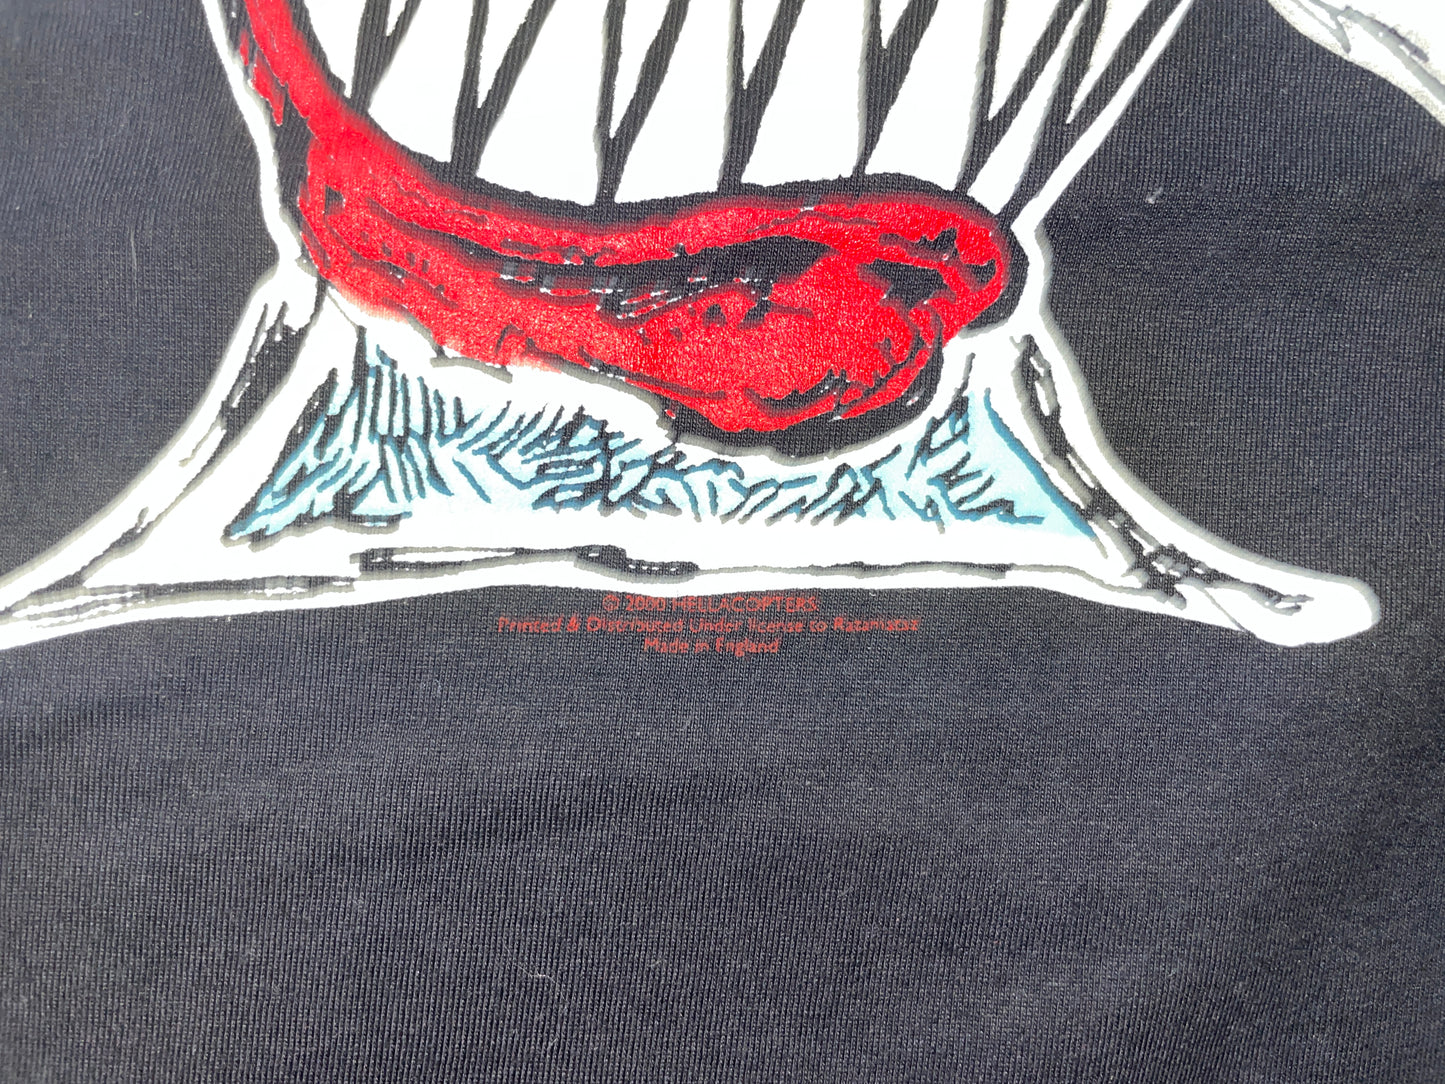 Vintage 2000 The Hellacopters T-Shirt